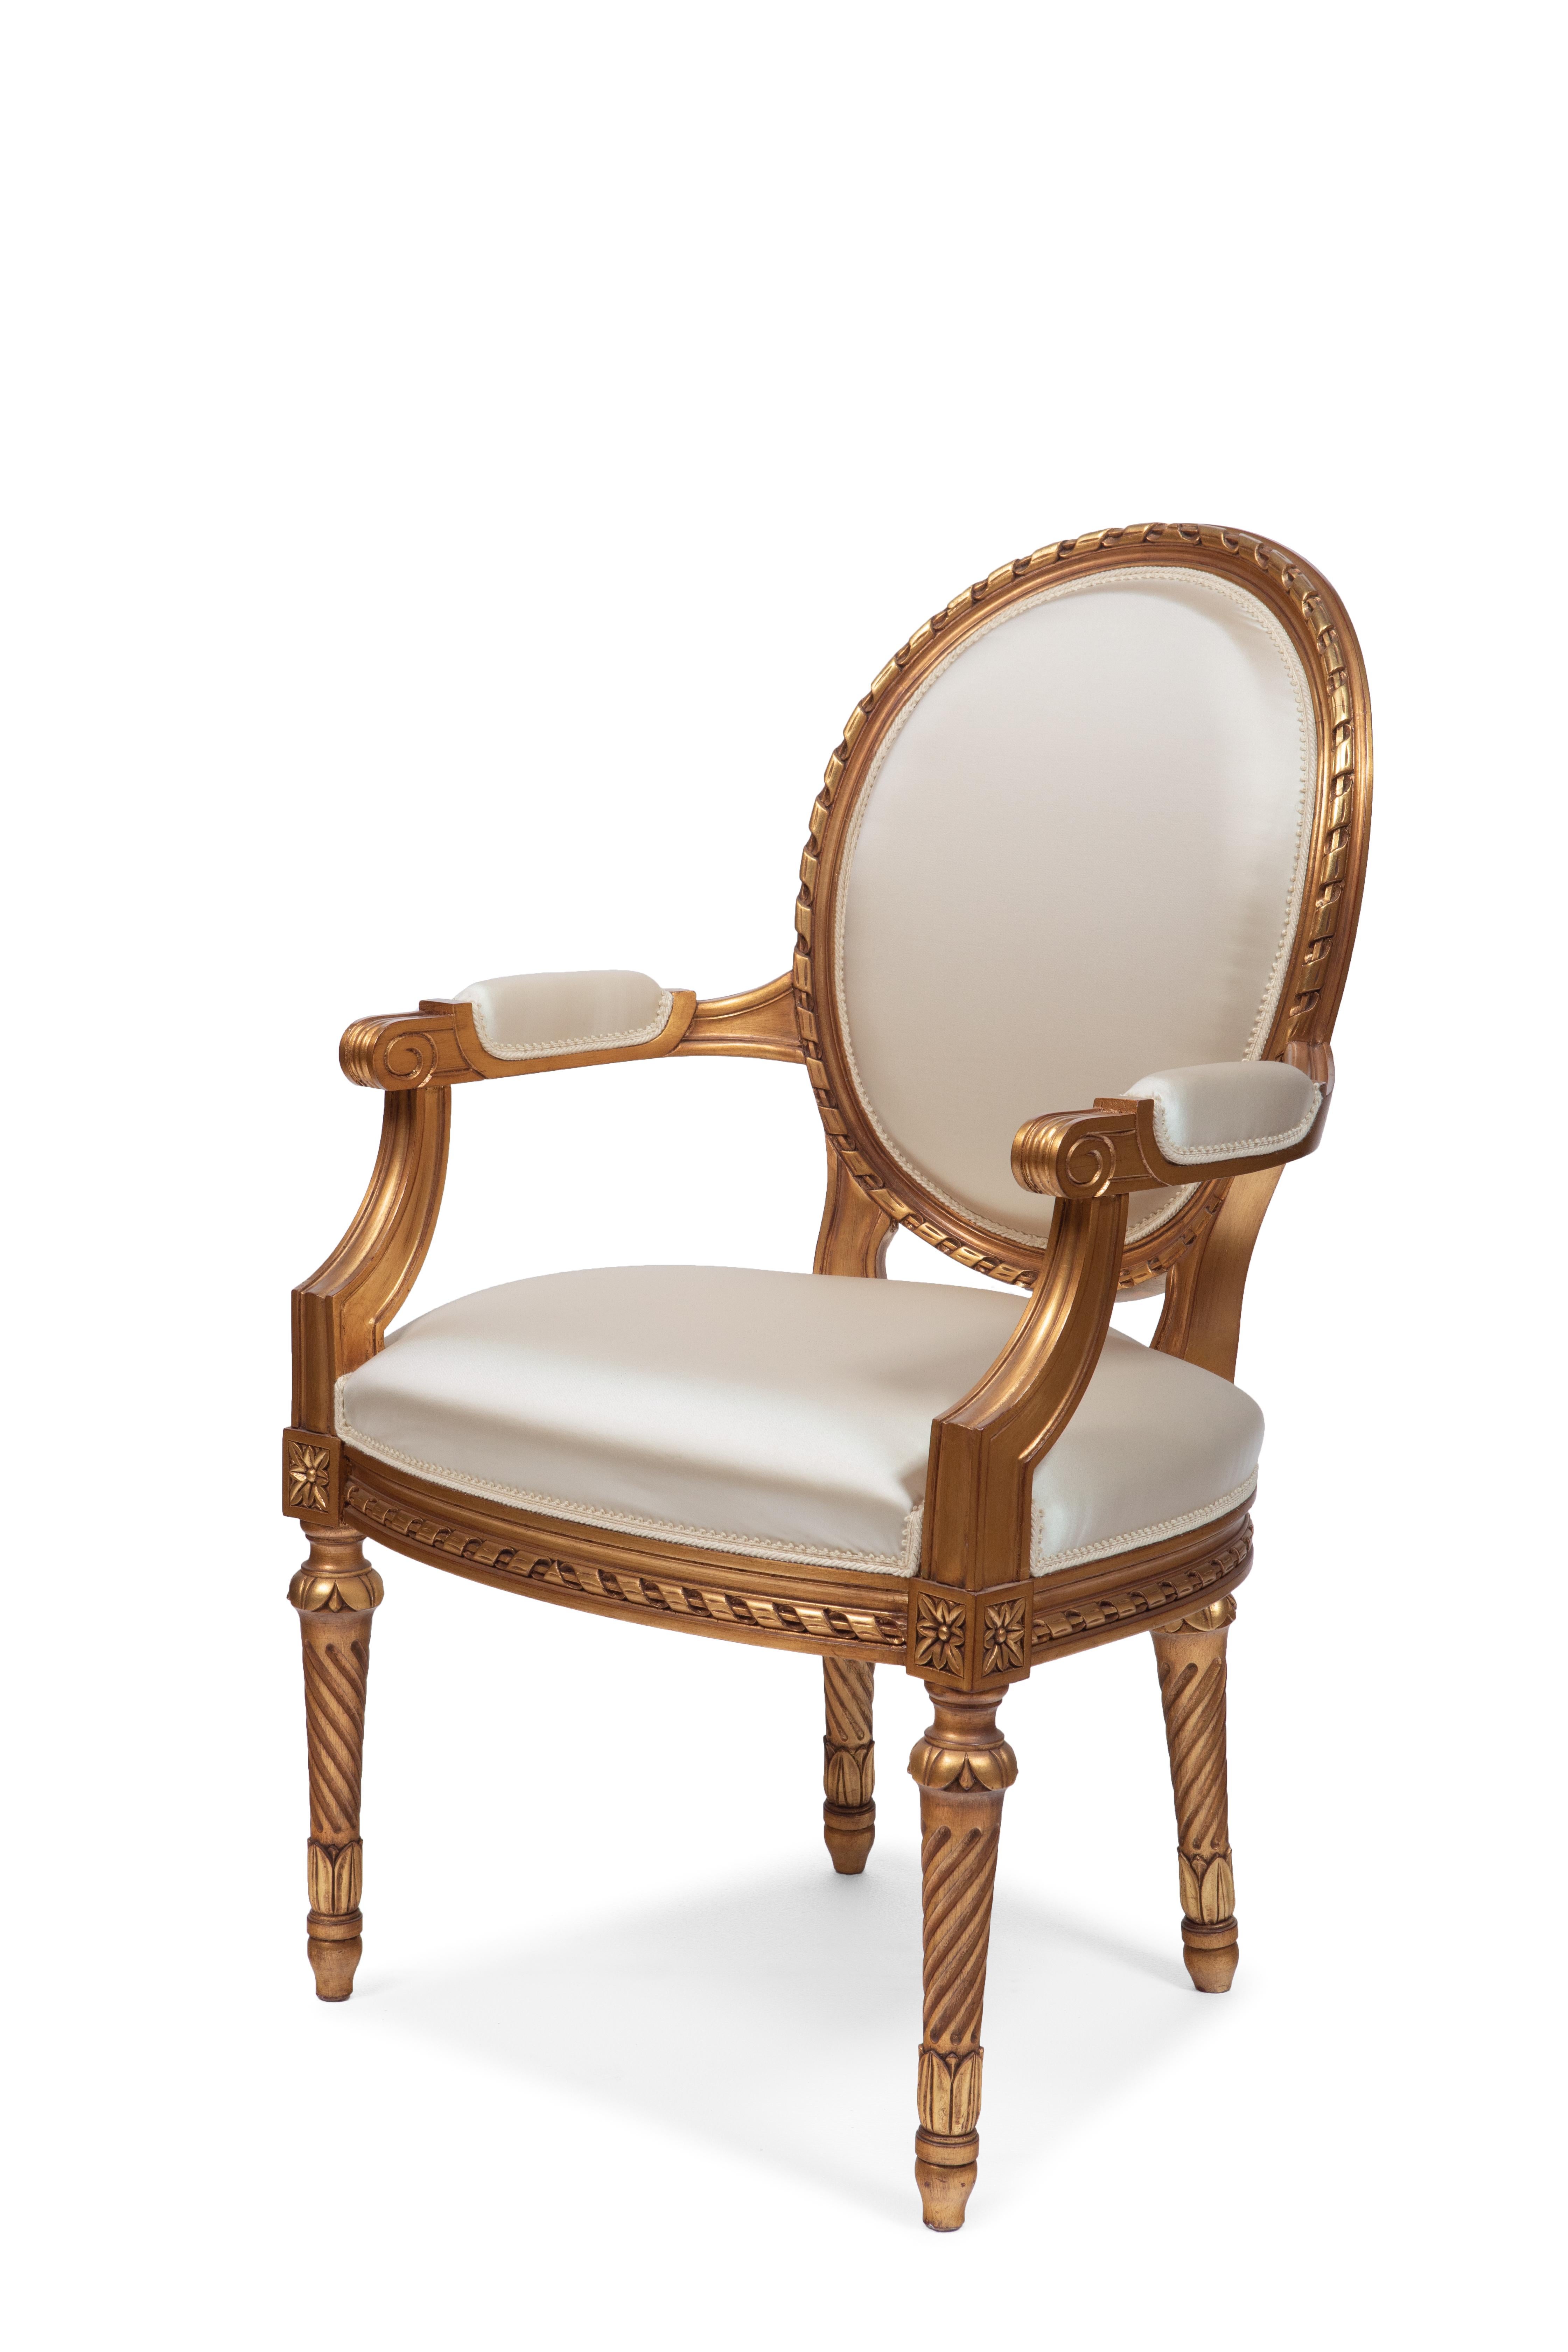 Luis XVI style dining armchair. It was proposed for the first time in the early 90s and become an iconic armchair for Belloni production.
Wood frame finely handcarved in Italy. Gold leaf hand applied finishing.( in photo finishing 29/04)
Available